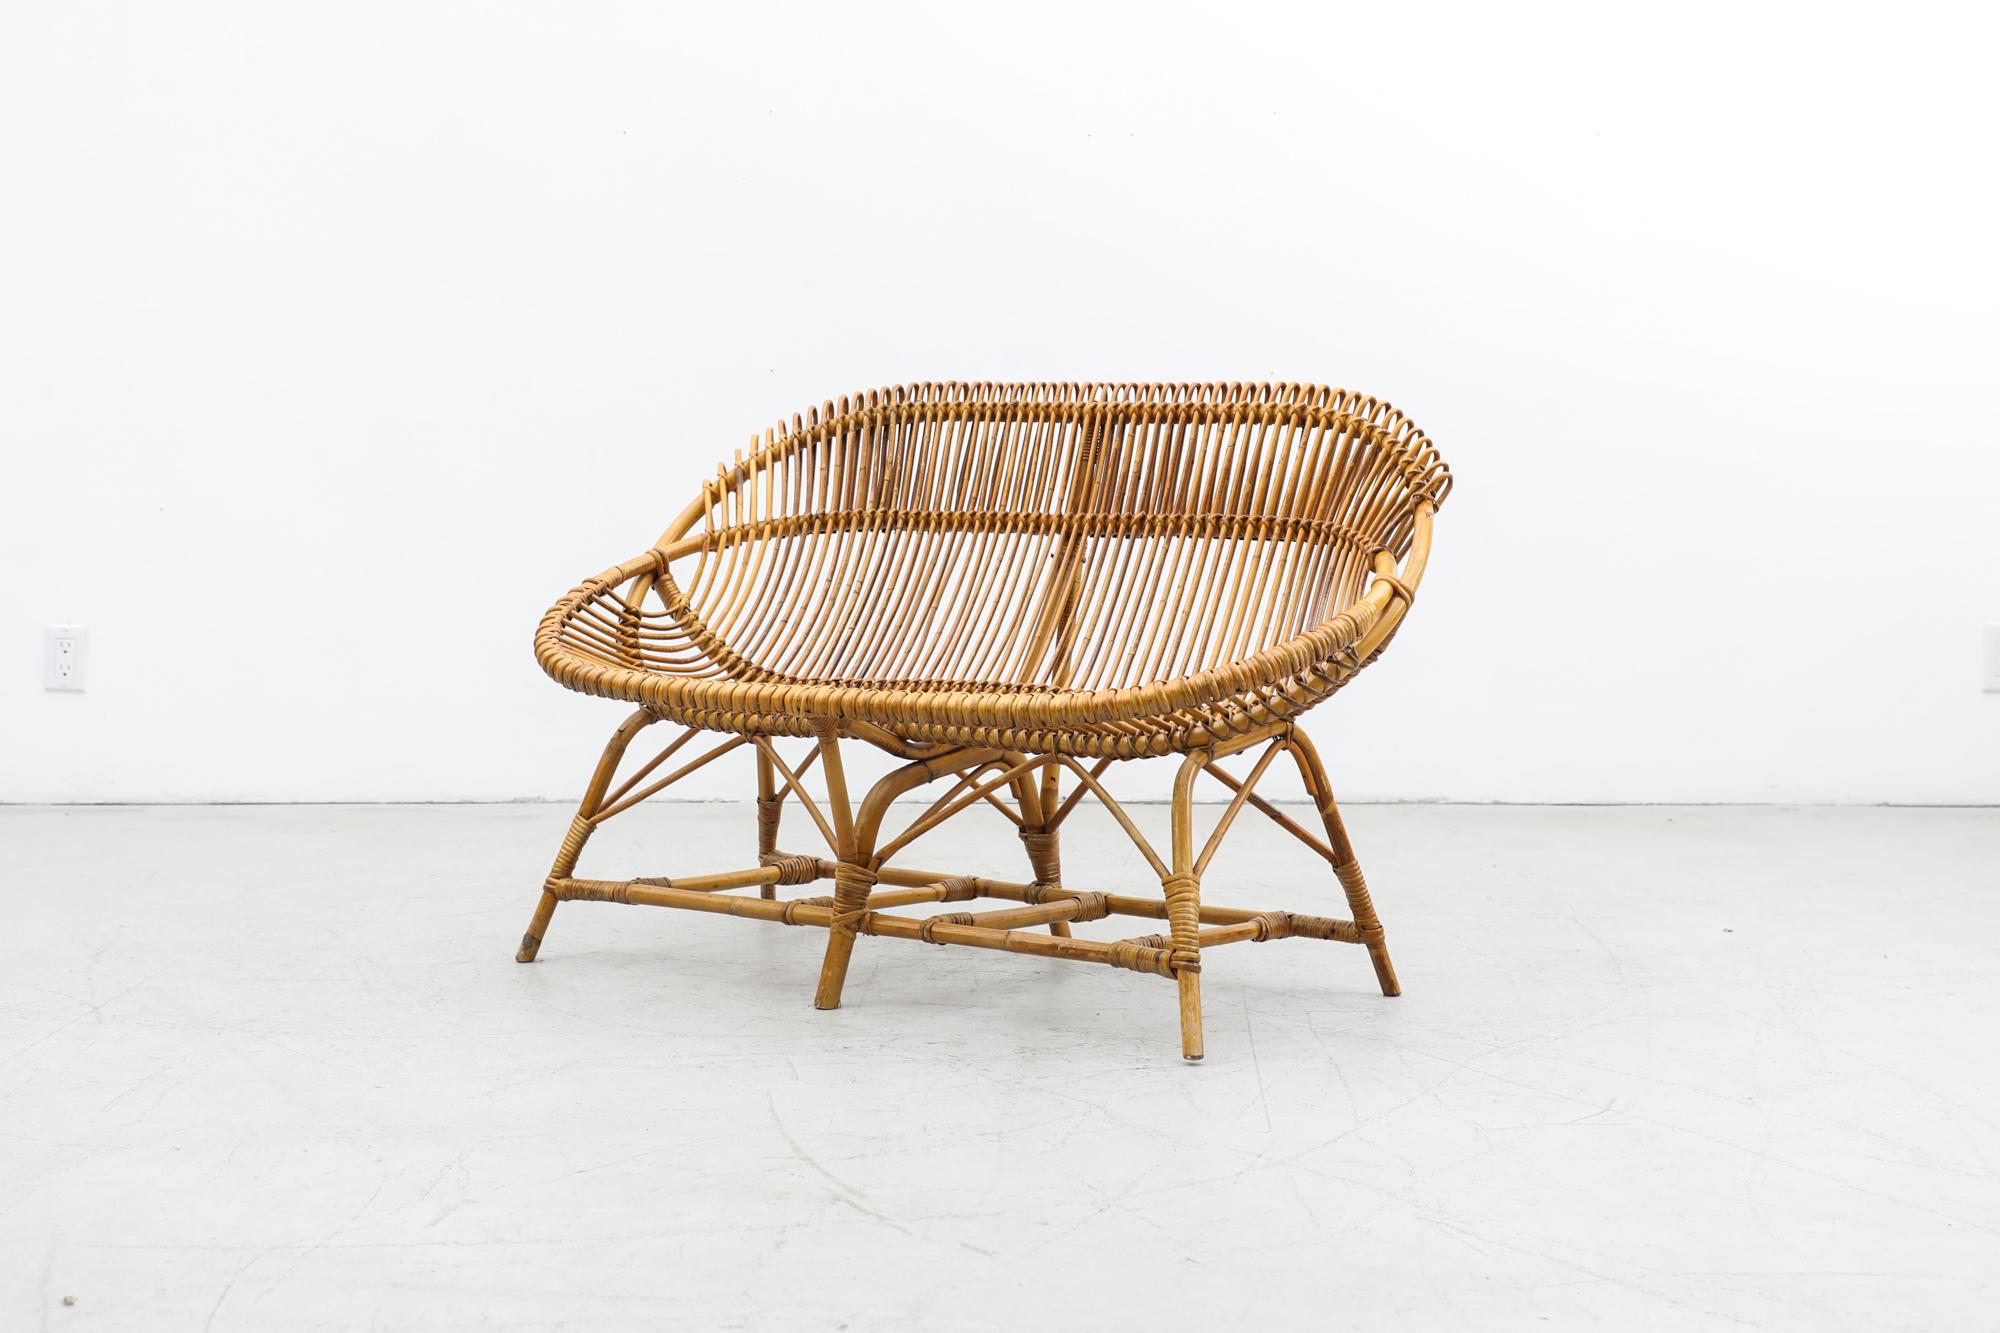 Gorgeous Franco Albini Inspired, masterfully hand-woven Mid-Century Bamboo Love Seat. In Original Condition with Some Signs of Wear Consistent with Age and Use. This piece can be used outdoors under a dry protected and covered area.  A pair of